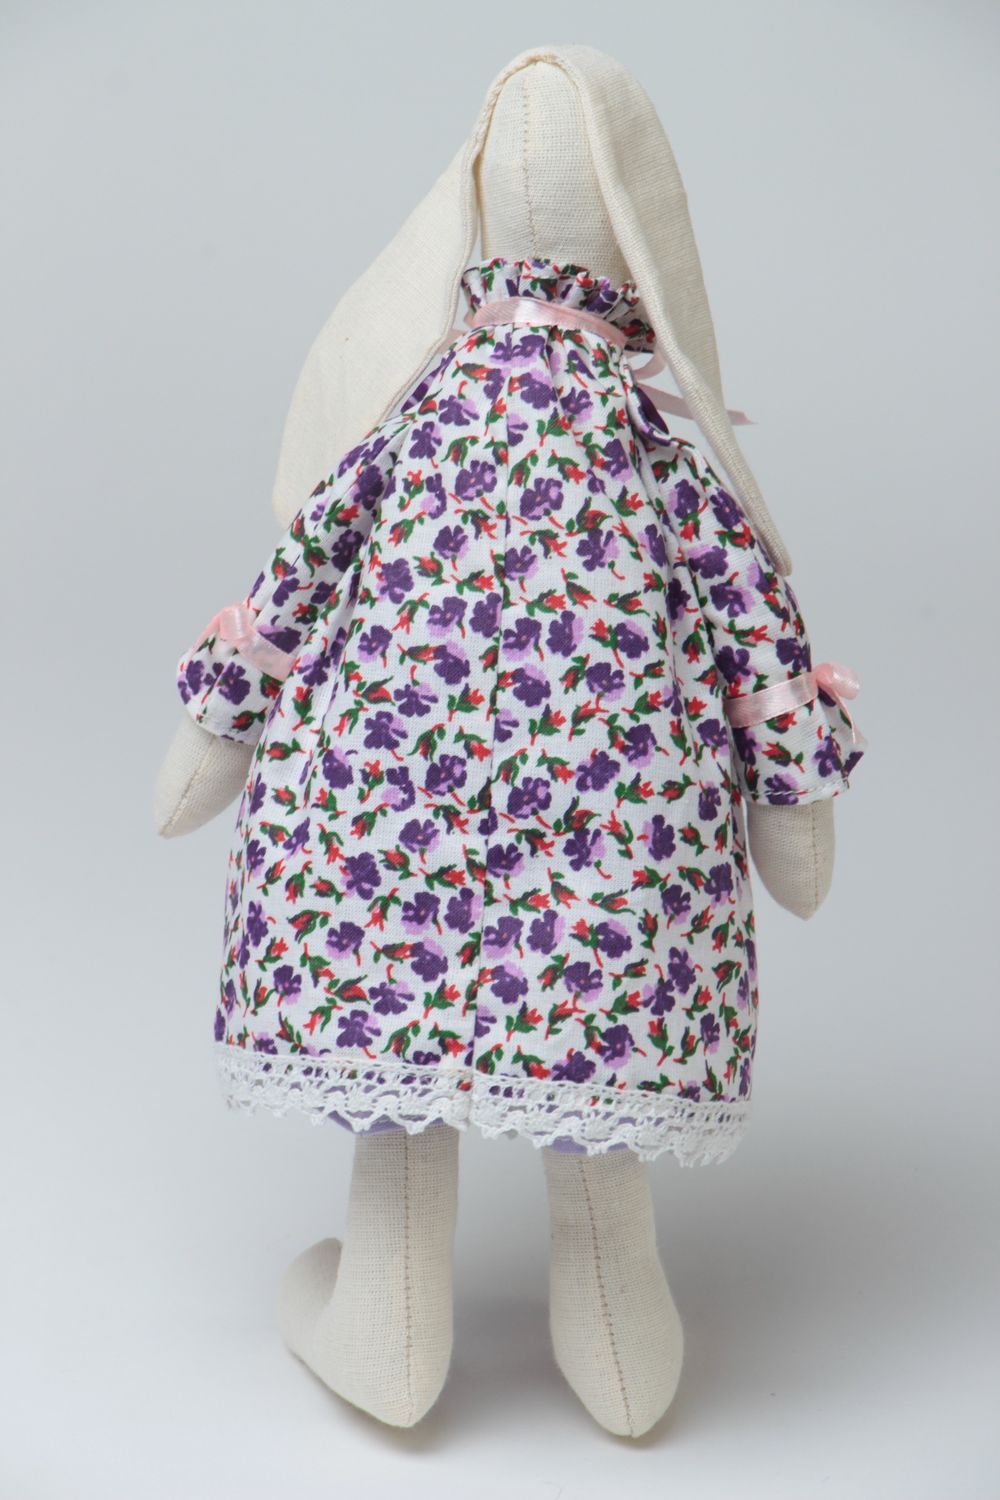 Handmade small fabric soft toy rabbit girl in dress with violet floral pattern photo 4